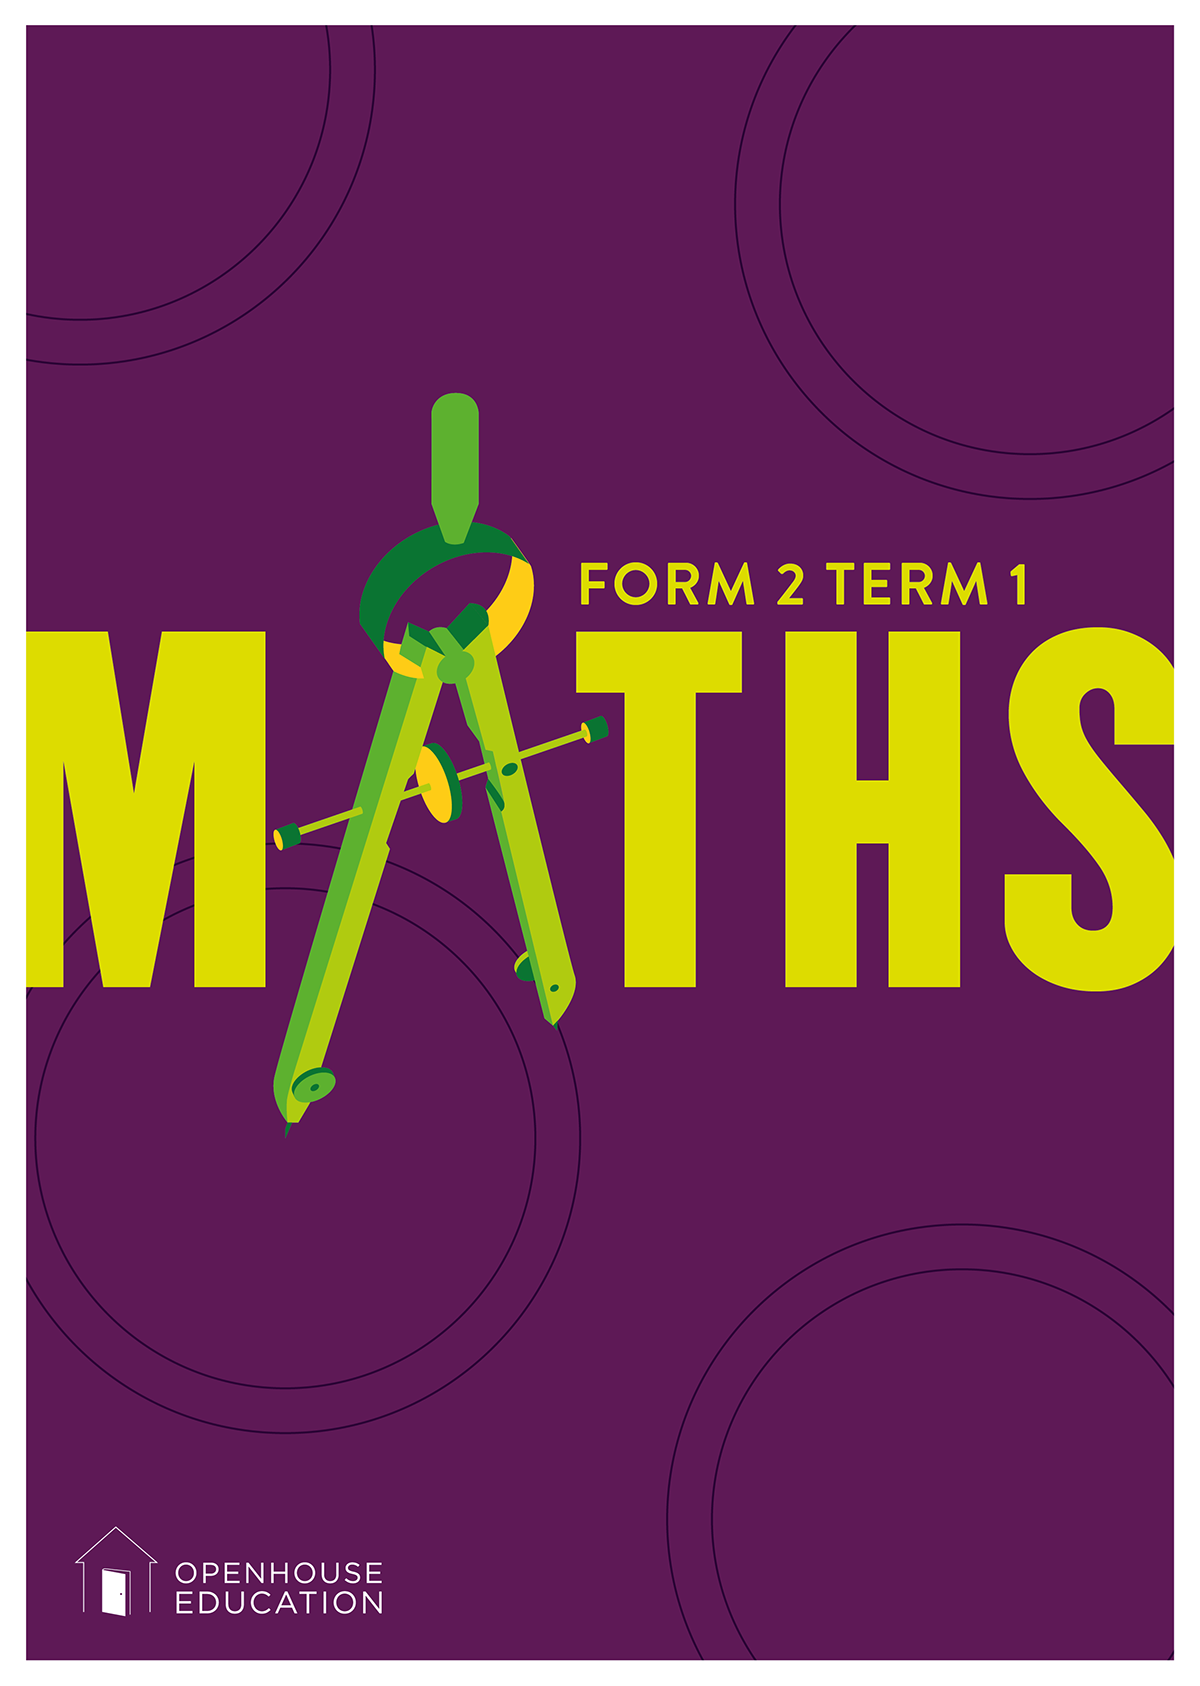 Openhouse Education book cover design maths